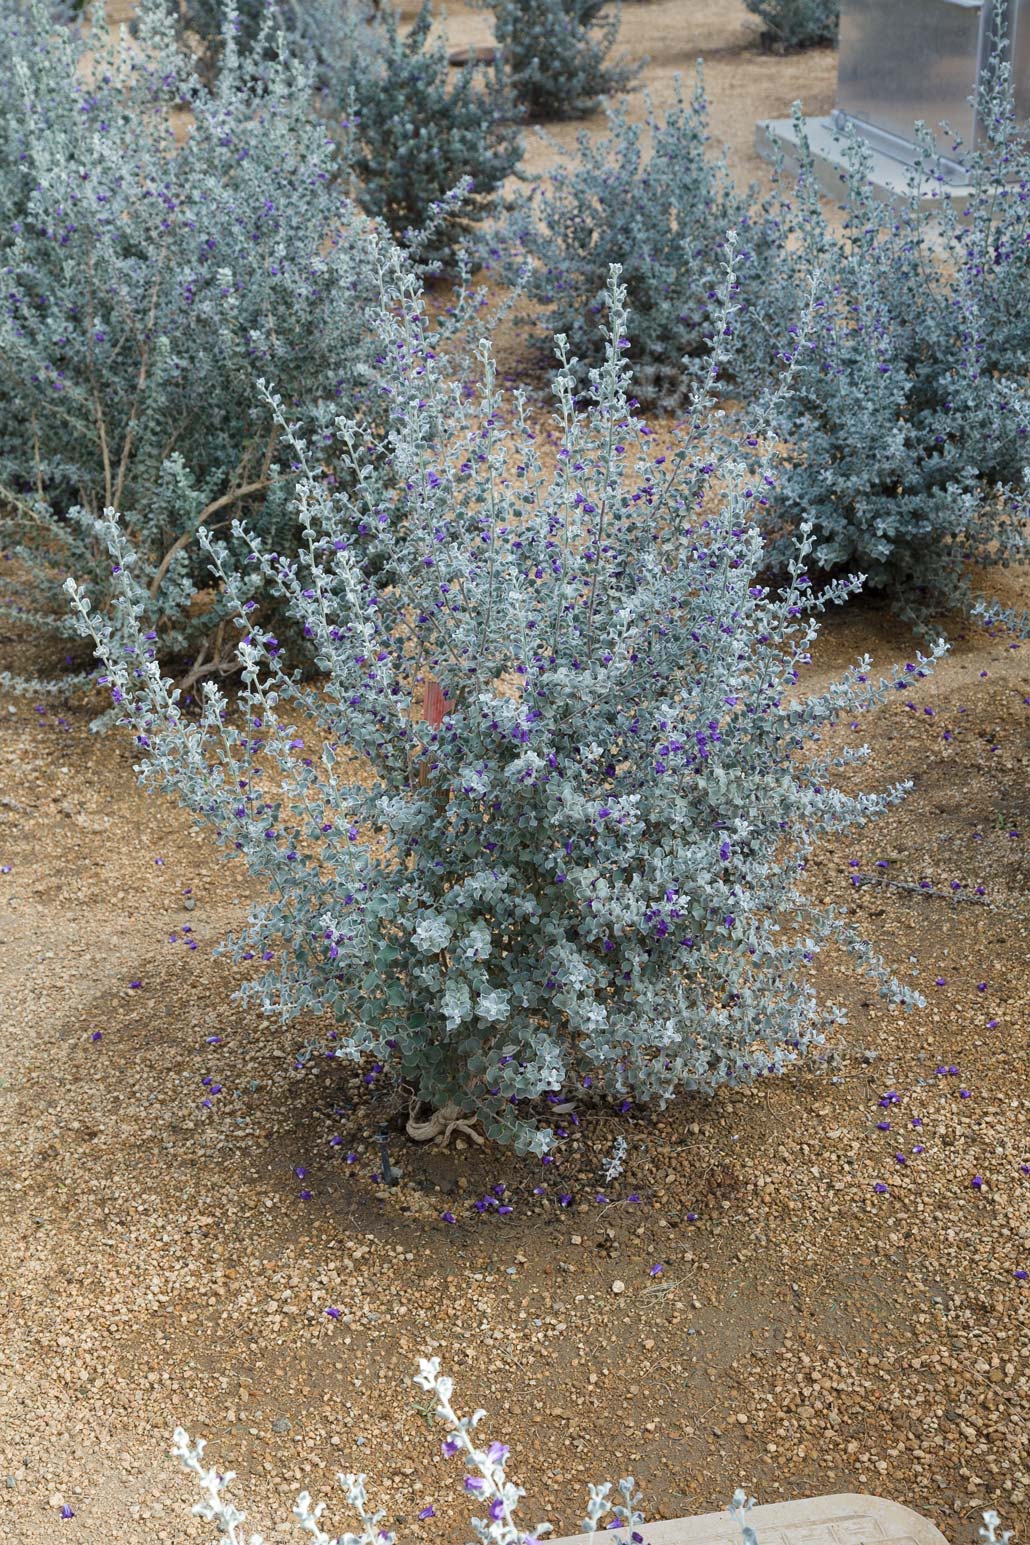 An example of the gray foilage and periwinkle flowers of the Sierra Bouquet variety.